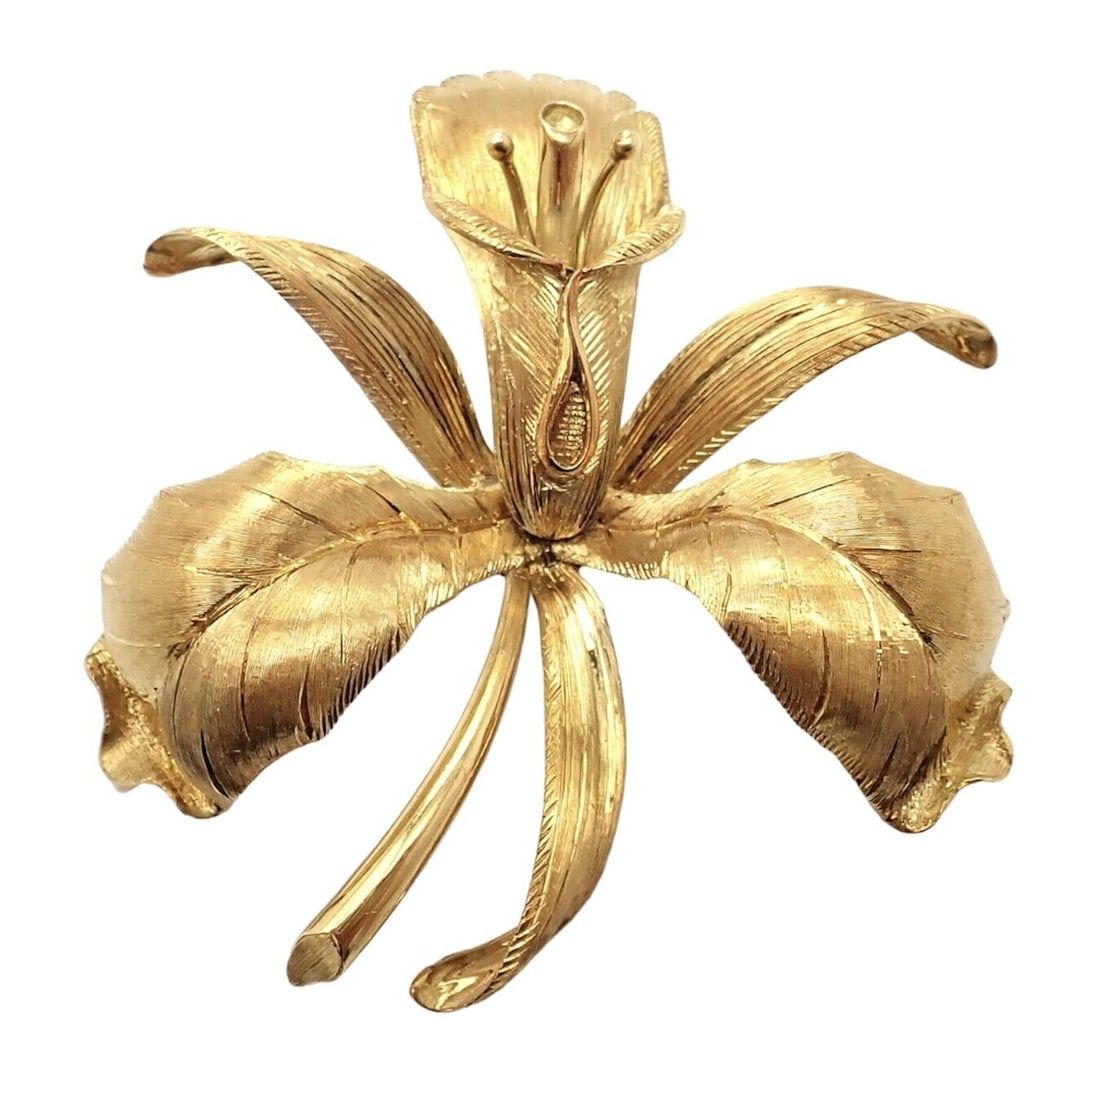 Tiffany & Co. 18K gold orchid or calla lily pin or brooch dating to the 1950s, estimated at $5,000-$6,000 at Jasper52.